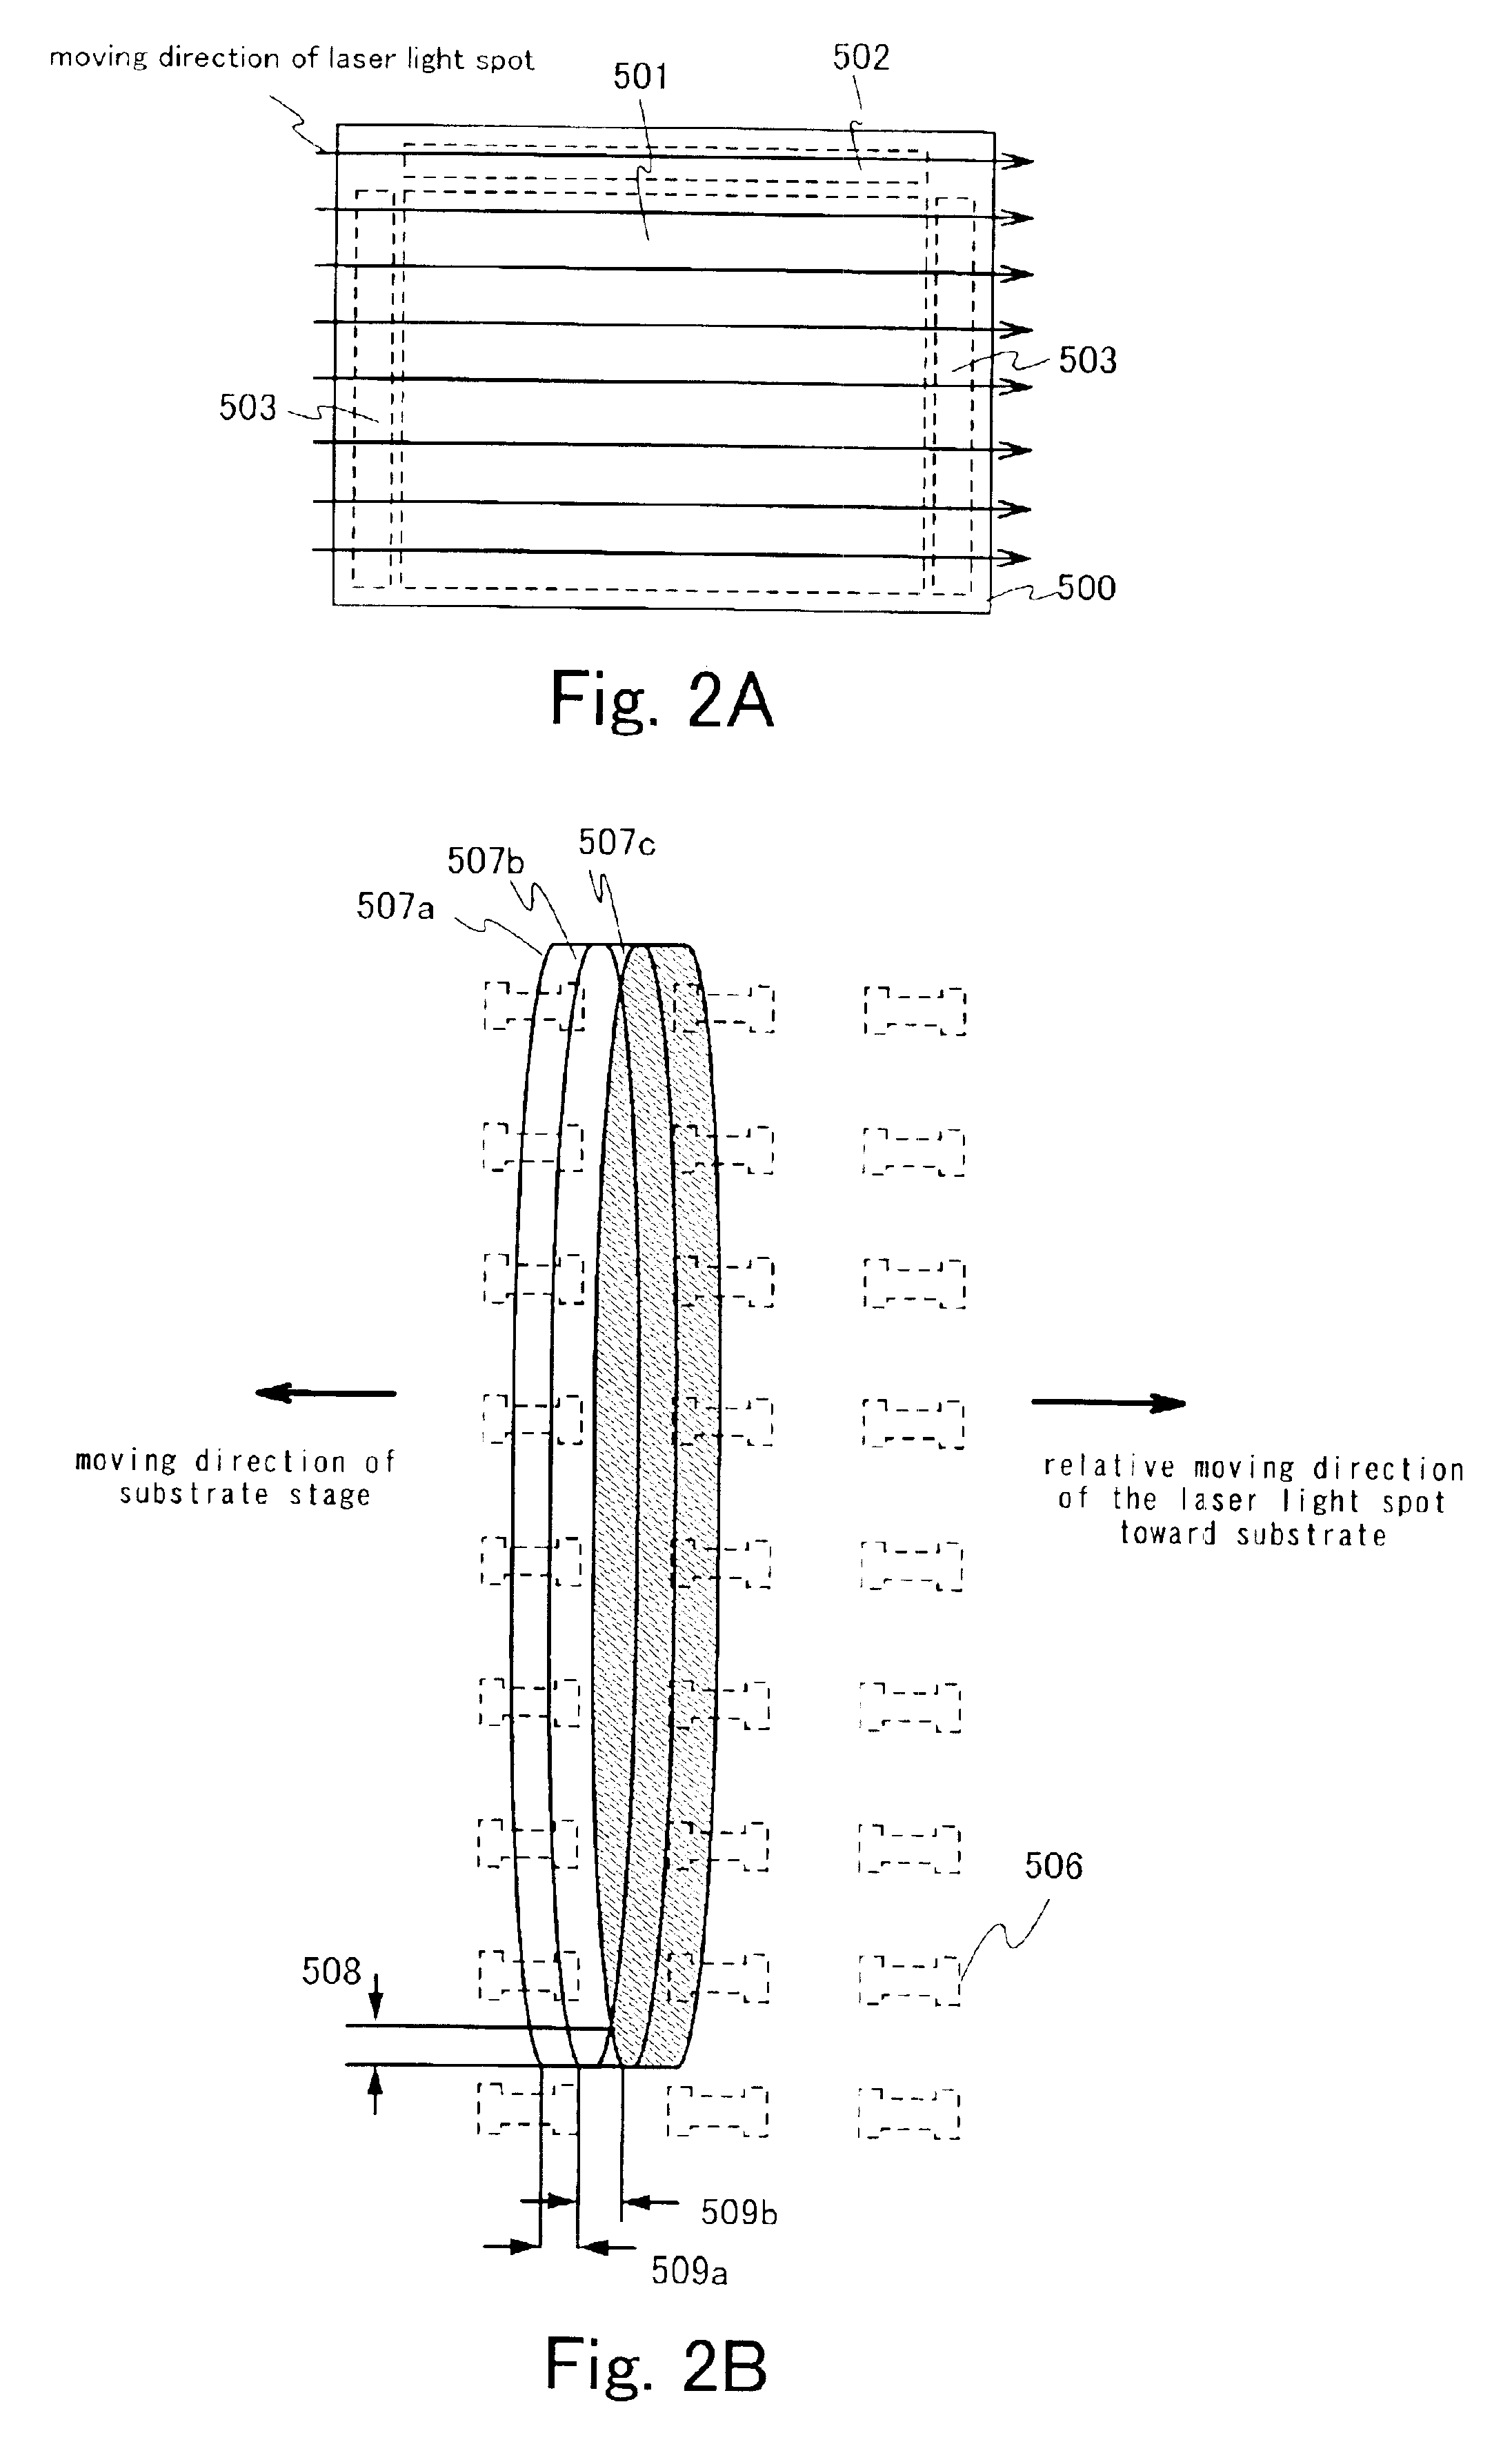 Manufacturing method for a semiconductor device using a marker on an amorphous semiconductor film to selectively crystallize a region with a laser light